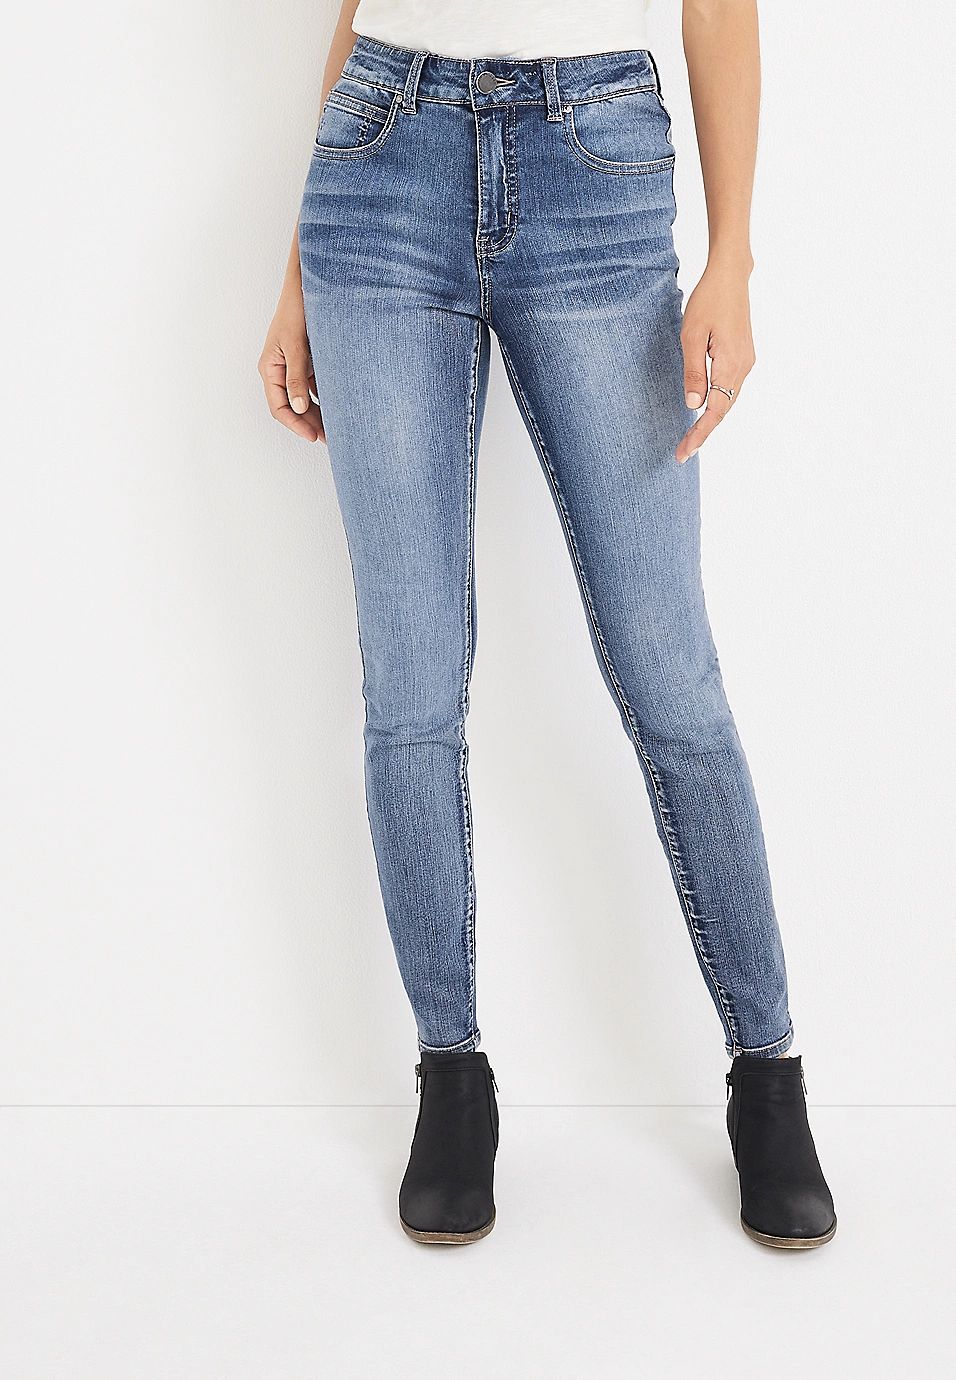 m jeans by maurices™ Everflex™ Super Skinny High Rise Stretch Jean | Maurices